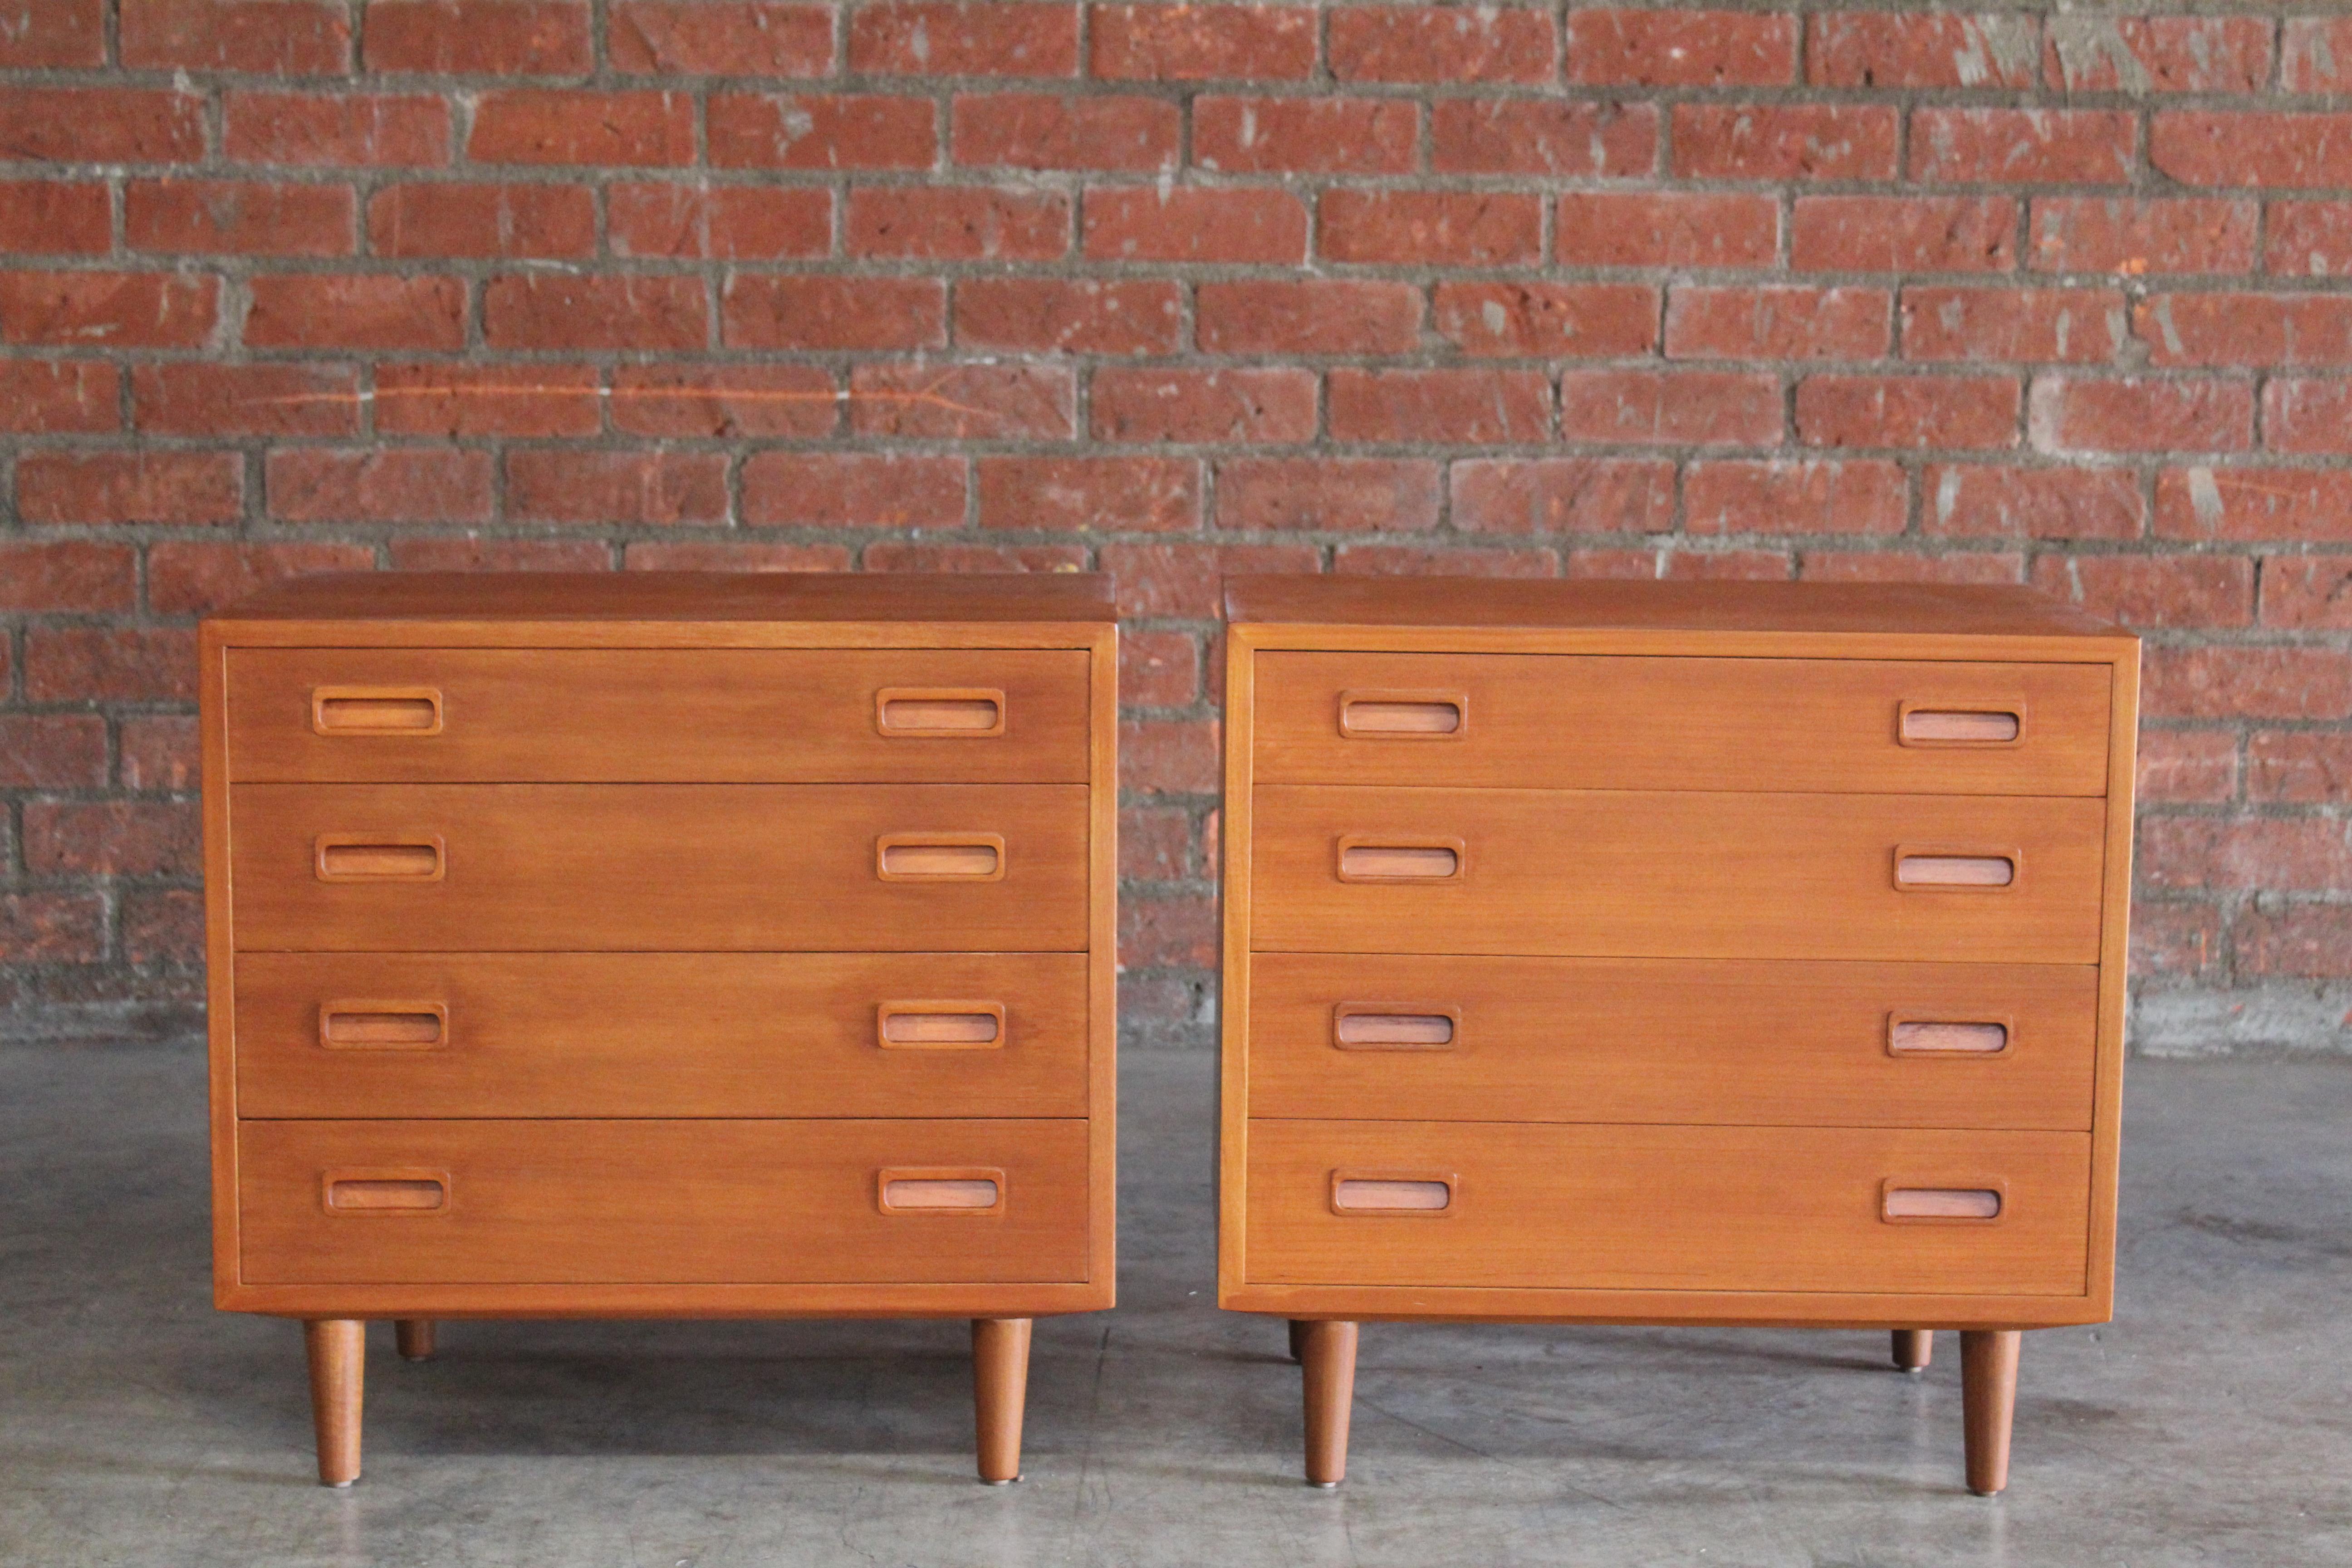 Pair of 1960s Danish teak chests of drawers by Poul Hundevad, 1960s. Perfect for bedside nightstands. The pair have been recently refinished and are in overall wonderful condition. One chest has a small burn mark- please see the detailed photo.